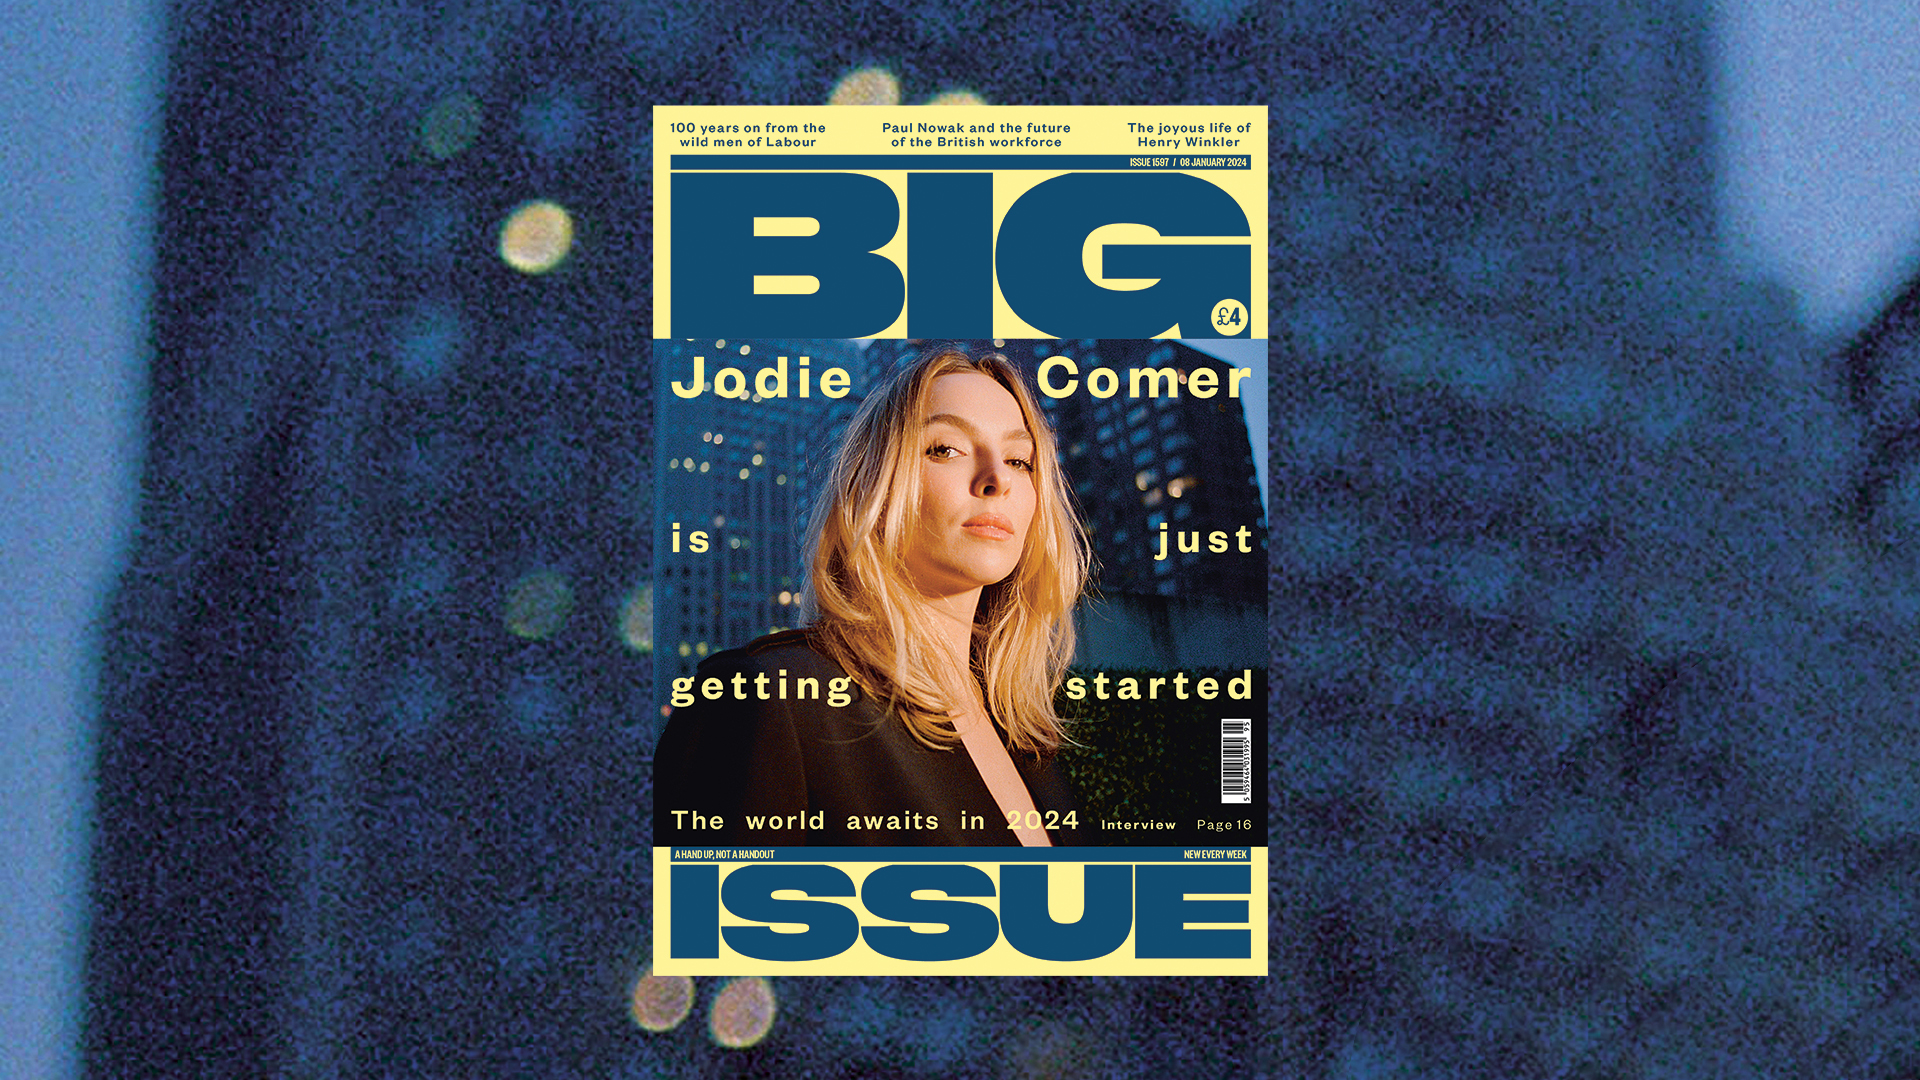 Jodie Comer on the cover of The Big Issue